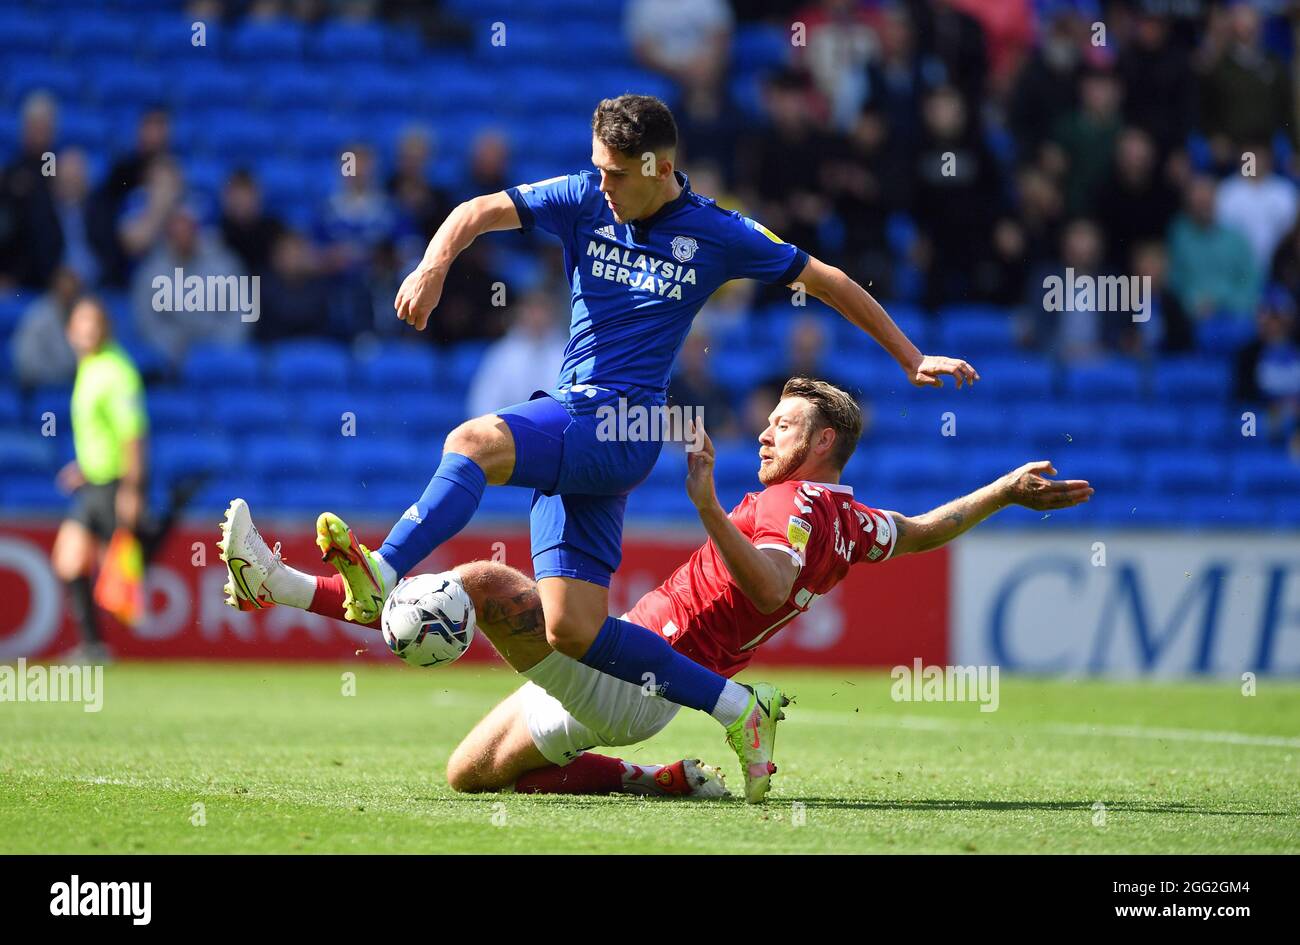 Cardiff City's Ryan Giles (left) and Bristol City's Tomas Kalas battle for the ball during the Sky Bet Championship match at the Cardiff City Stadium, Cardiff. Picture date: Saturday August 28, 2021. Stock Photo